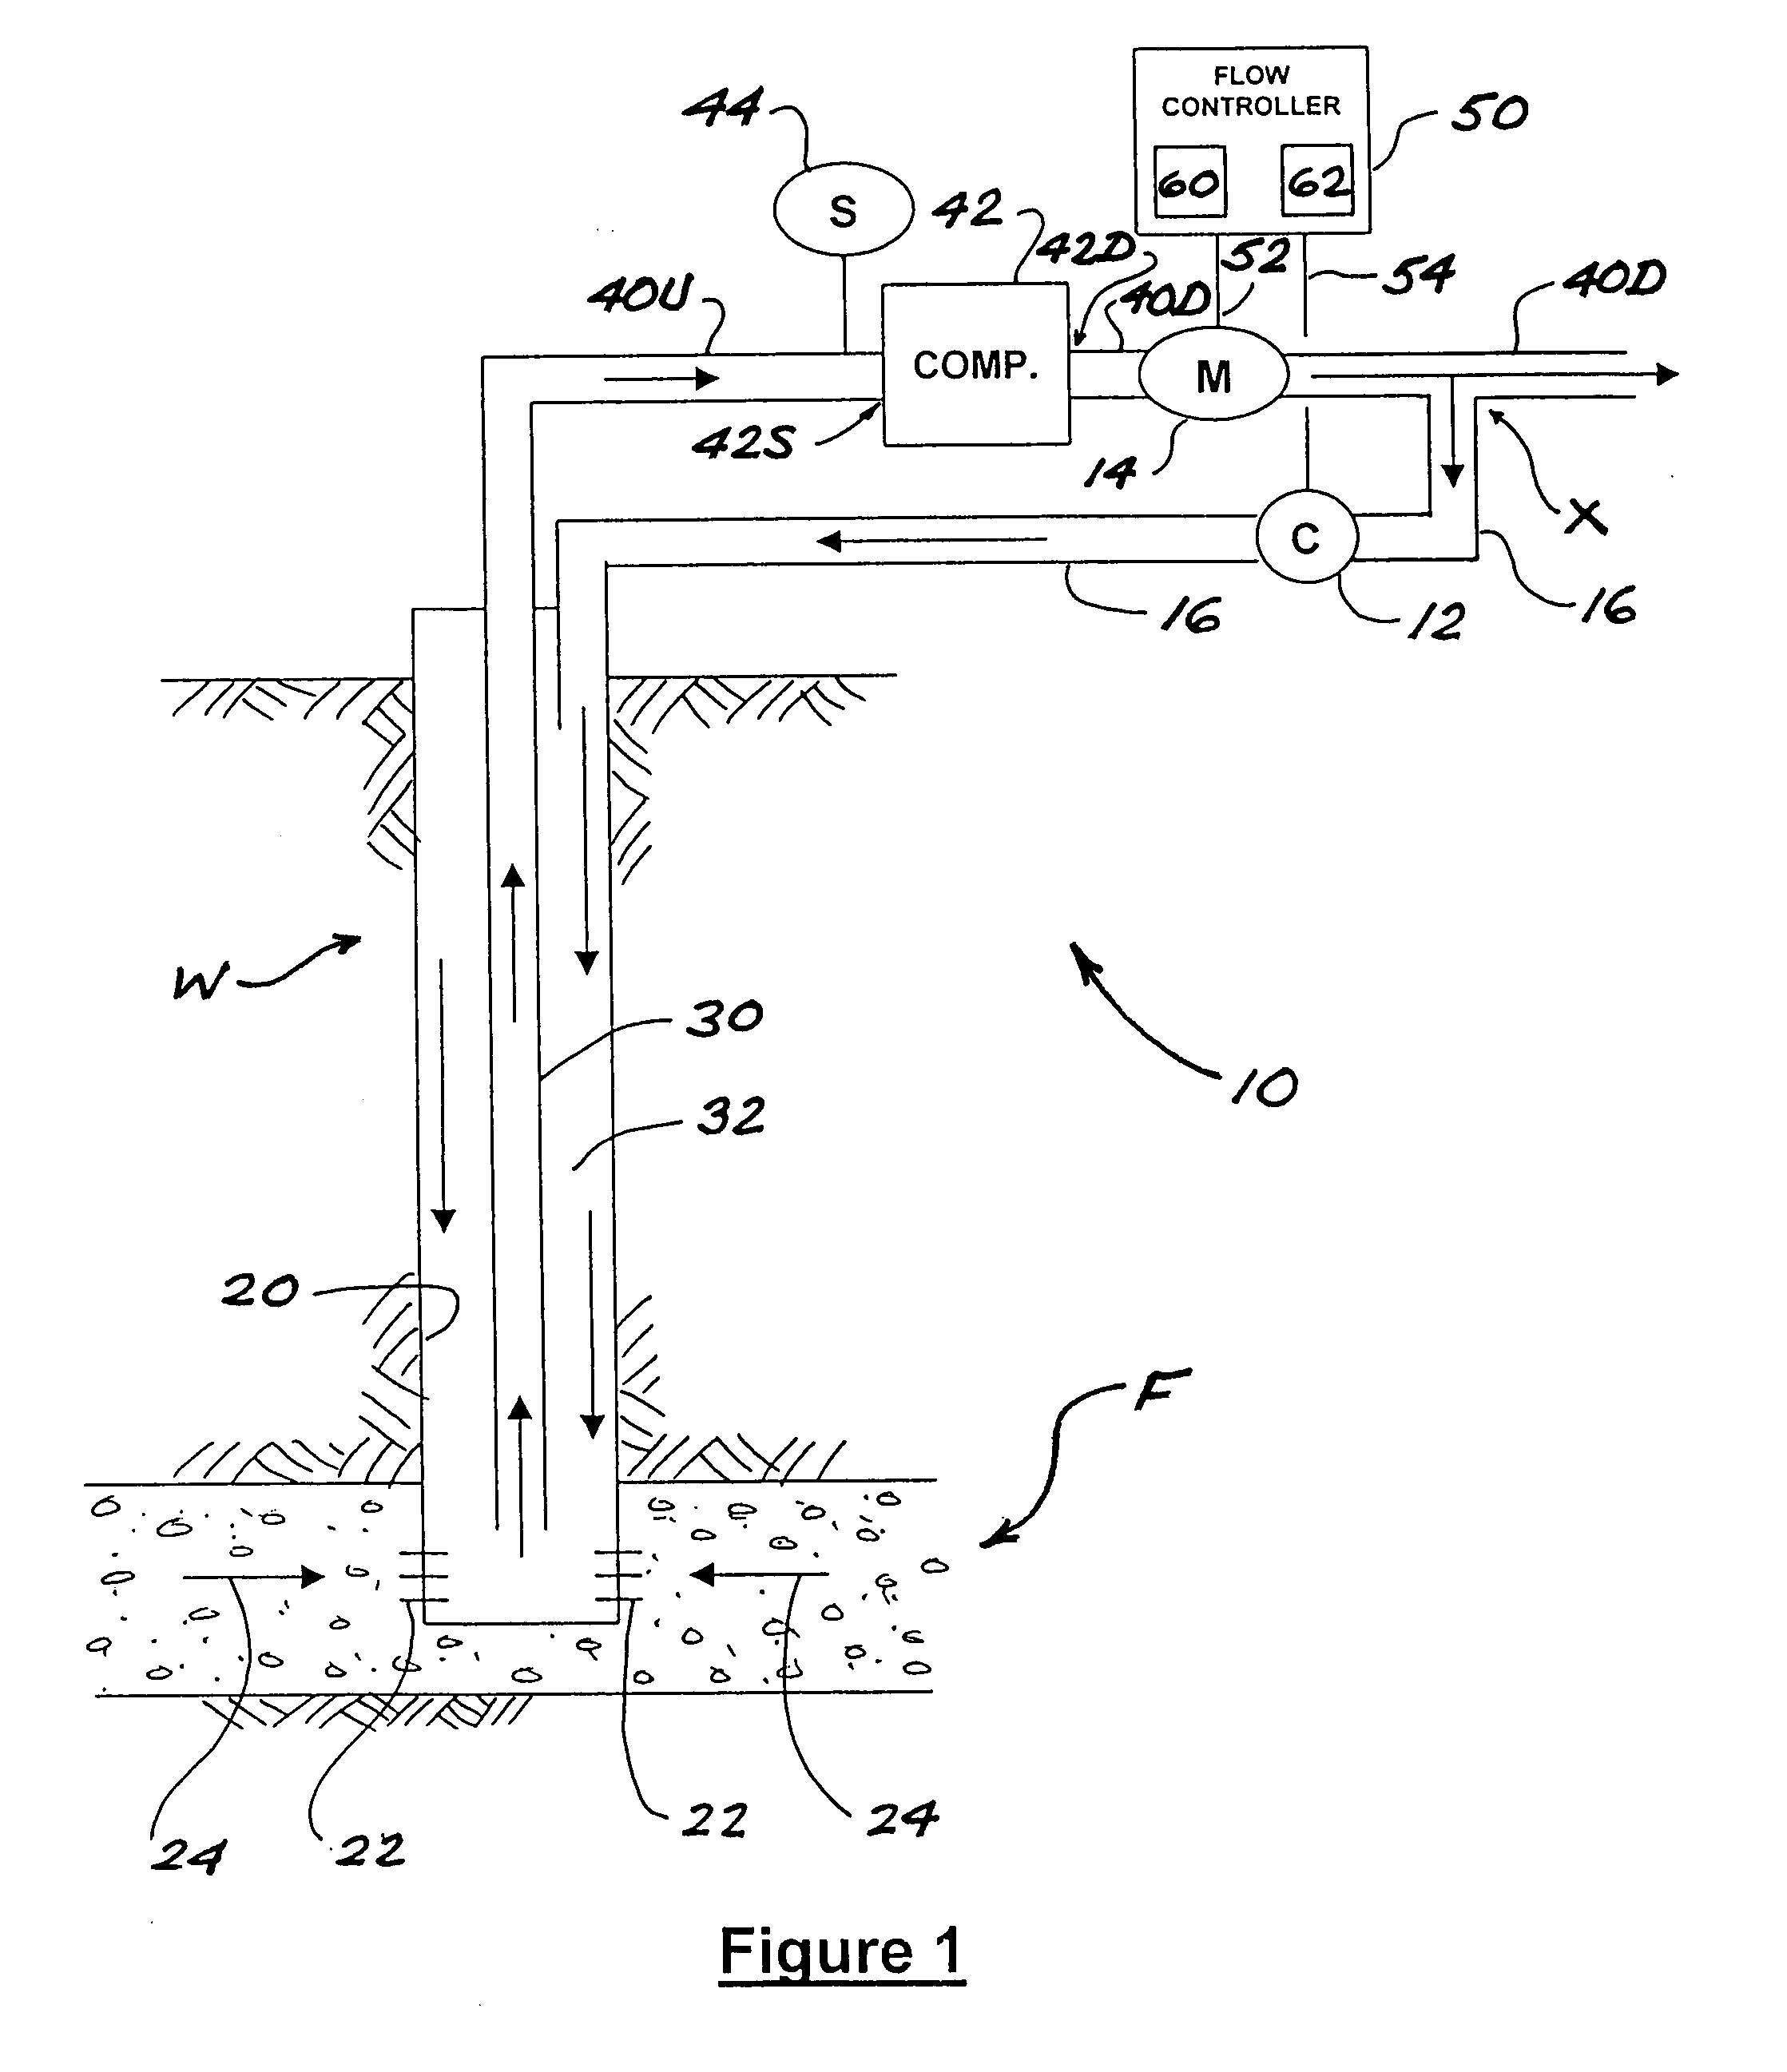 Apparatus and method for enhancing productivity of natural gas wells